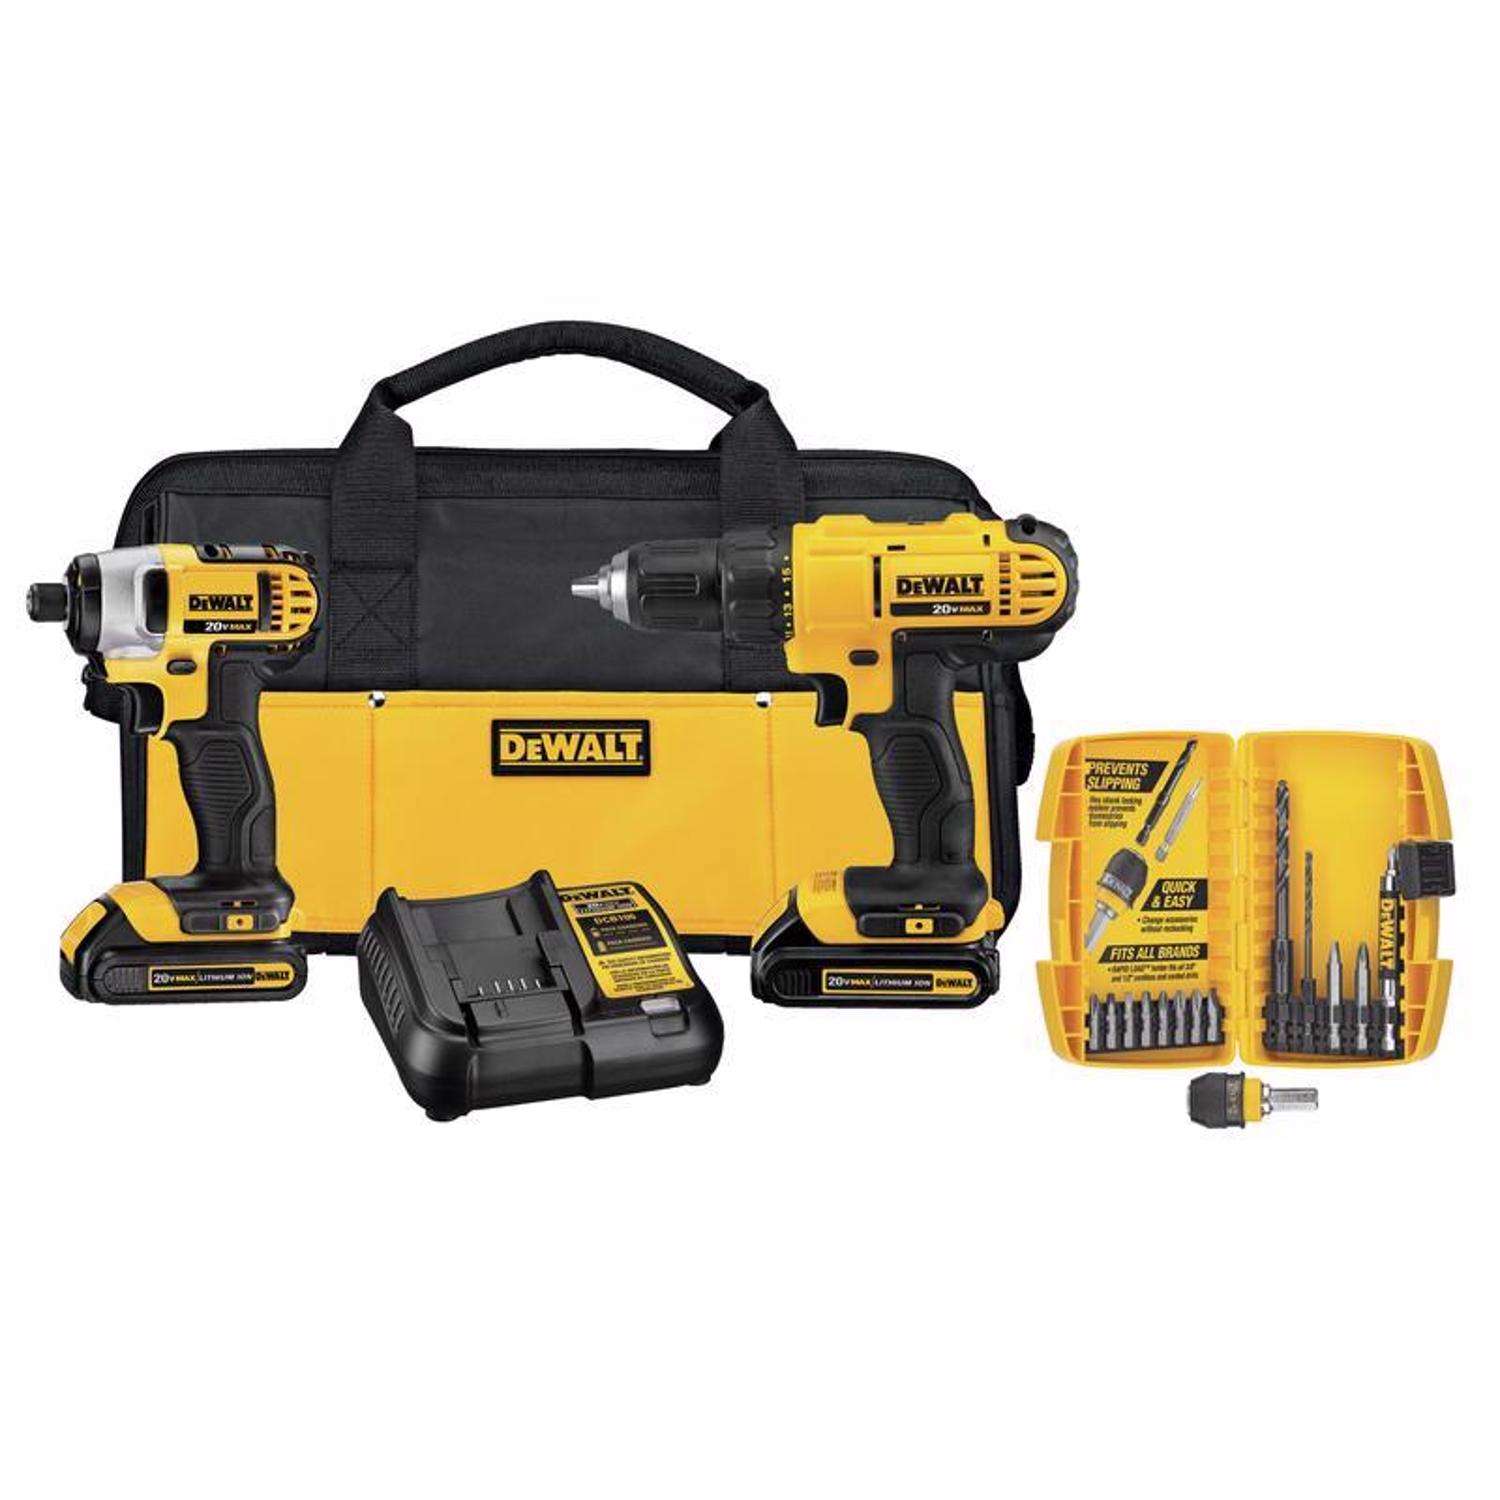 DeWalt 20V MAX 2-Tool Cordless Brushed Compact Drill Impact Driver Kit  Ace Hardware